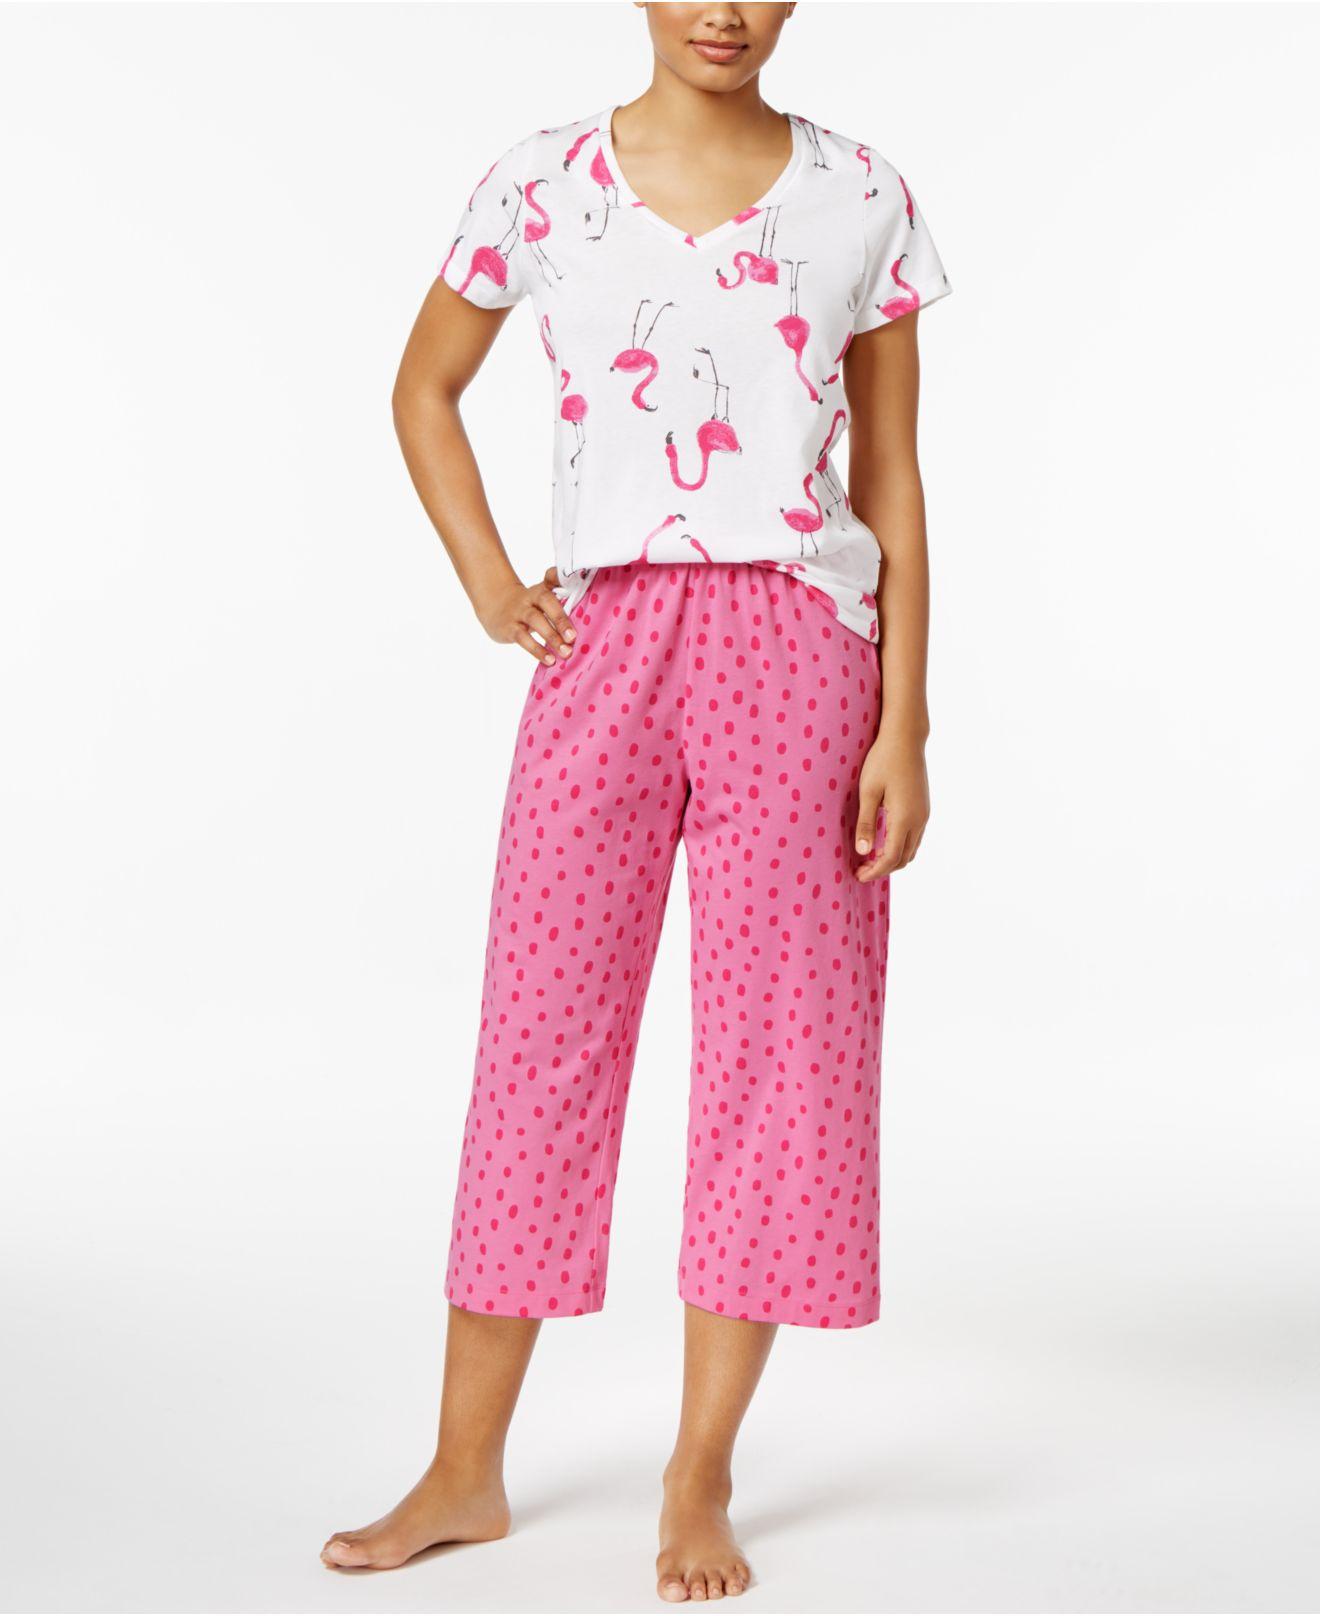 Lyst - Hue V-neck Flamingo Top And Cropped Pants Knit Pajama Set in White